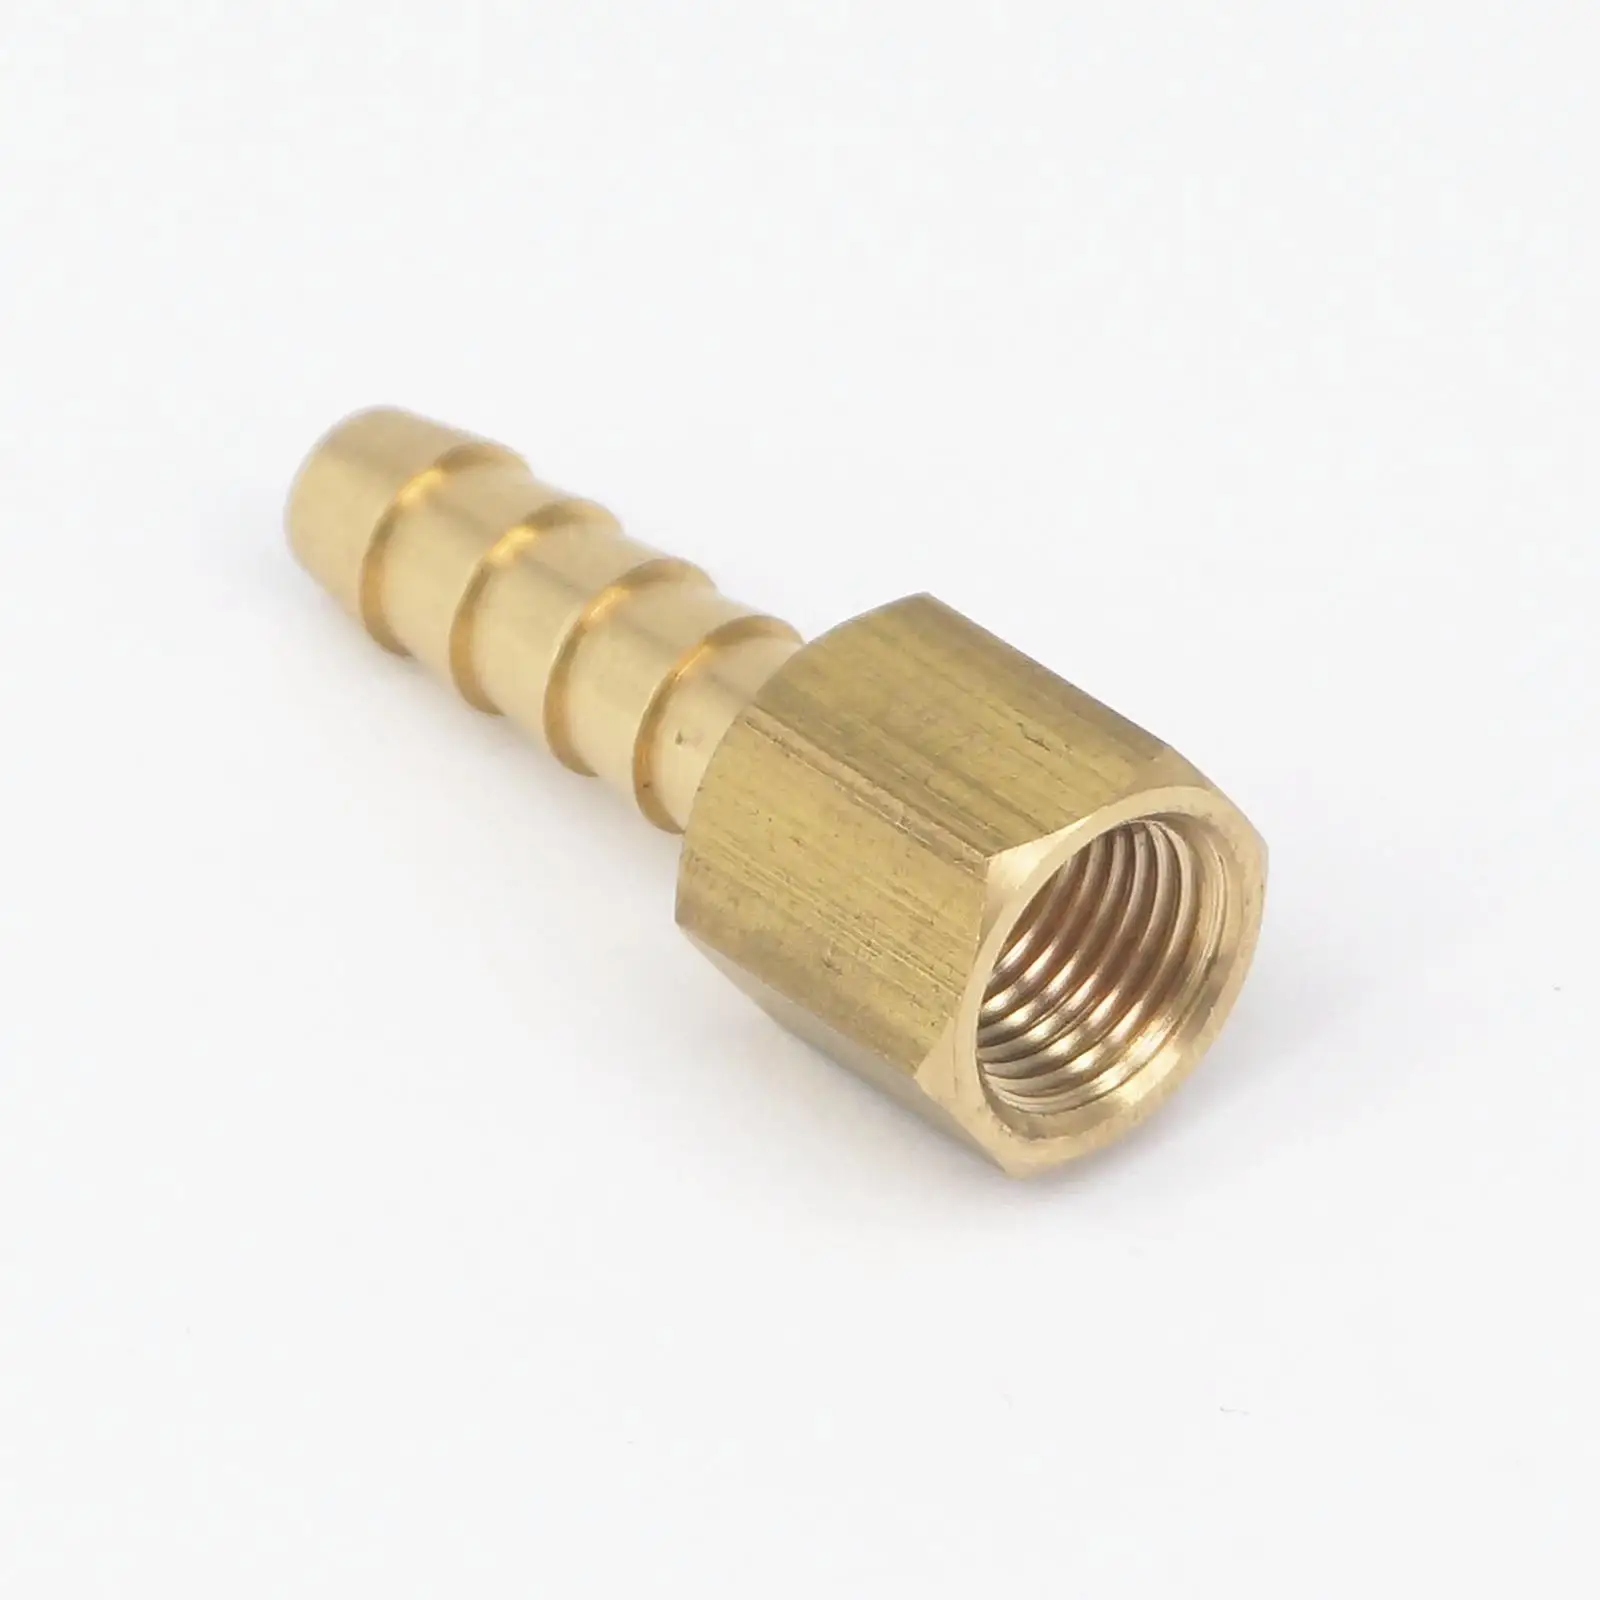 Adapter New StyLe Brass Hose Fitting 1/8 Barb x 1/4 NPT Male Pipe 